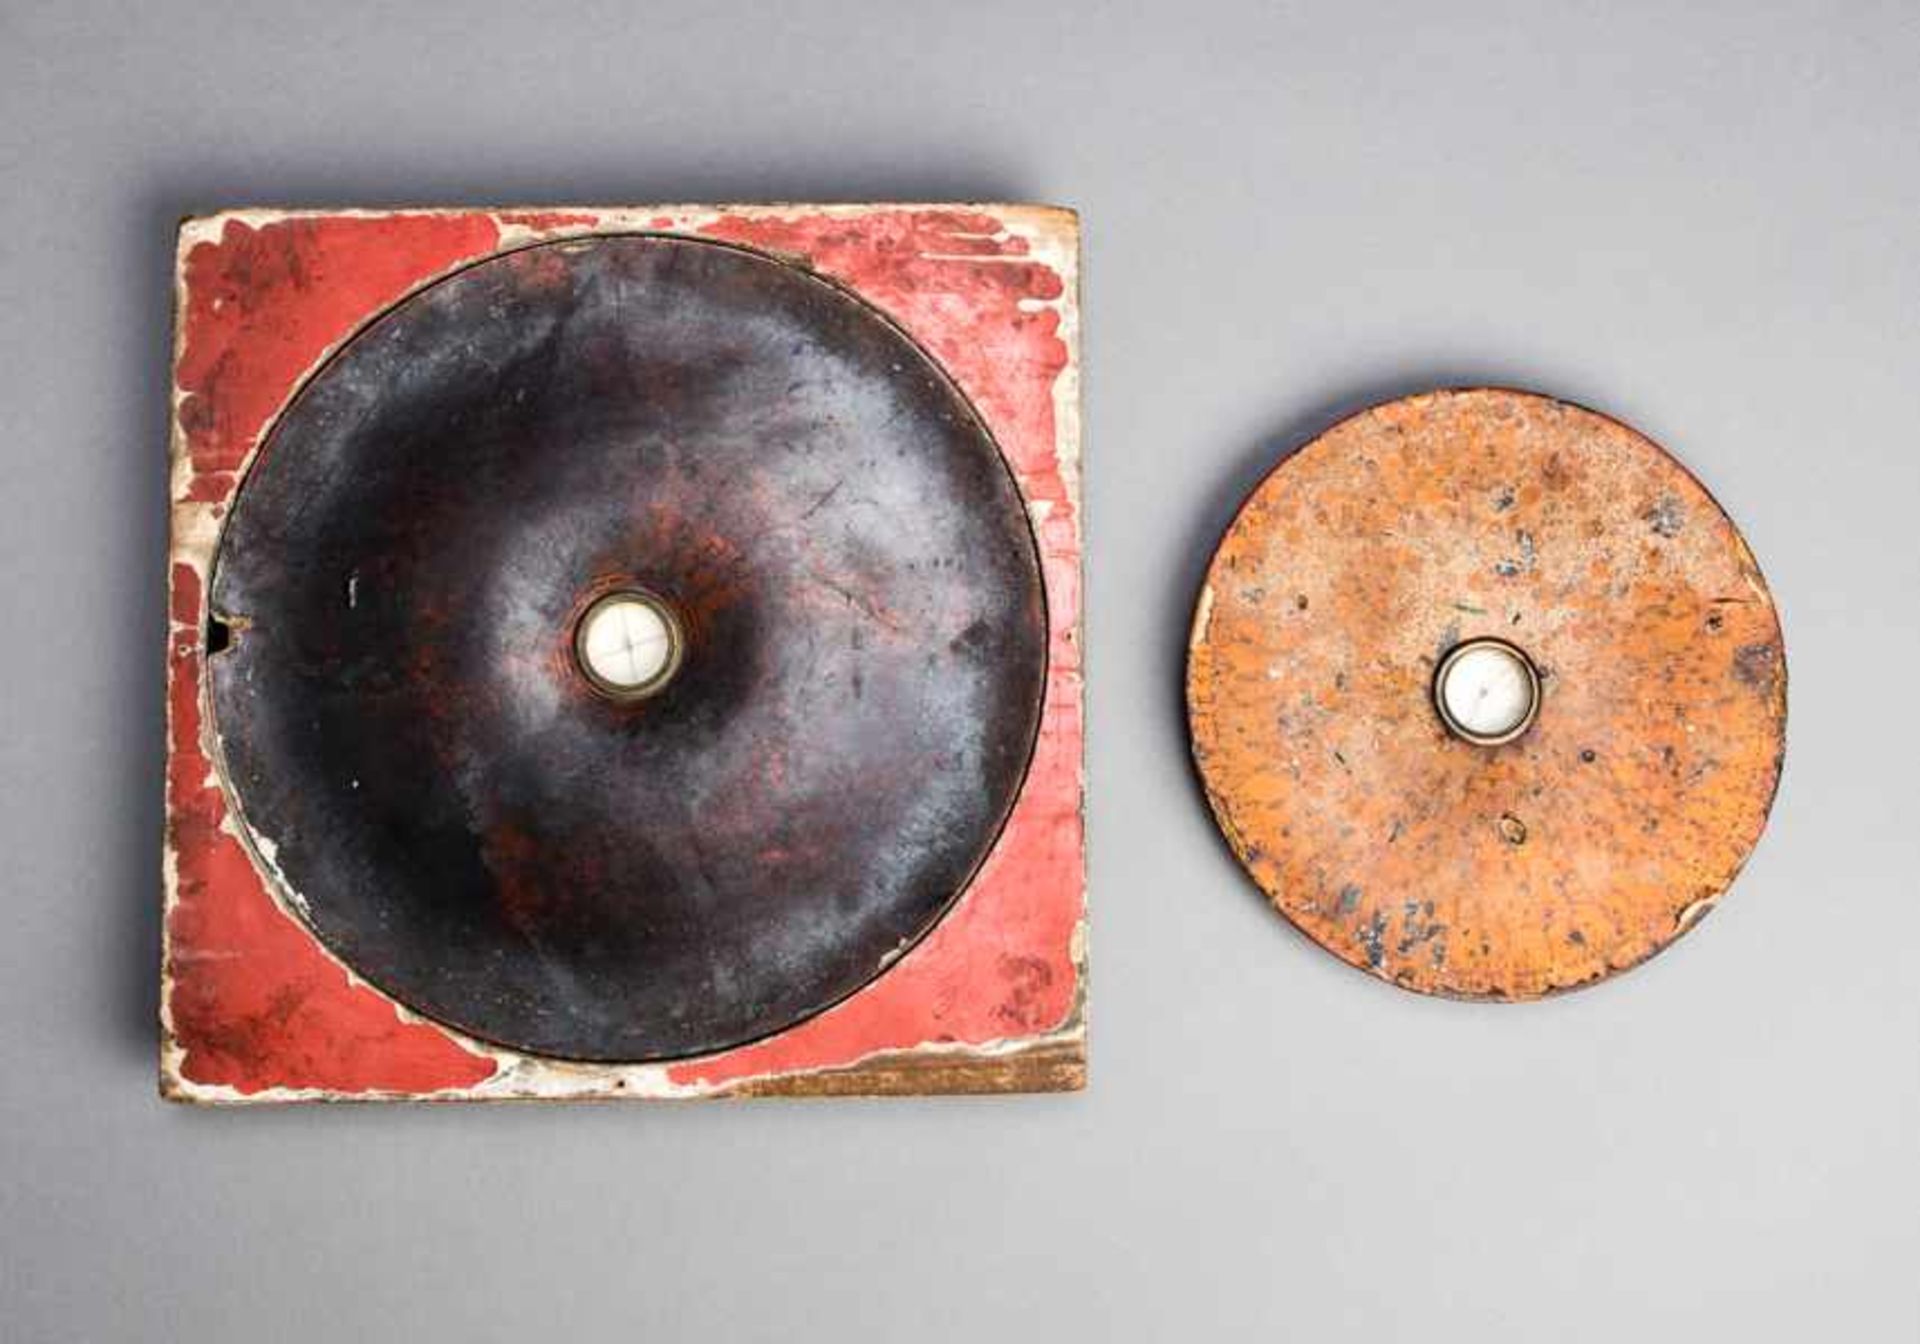 2 CHINESE COMPASSES Wood, glass, metal. China, ca. 19002個中國指南針In addition to paper, book printing